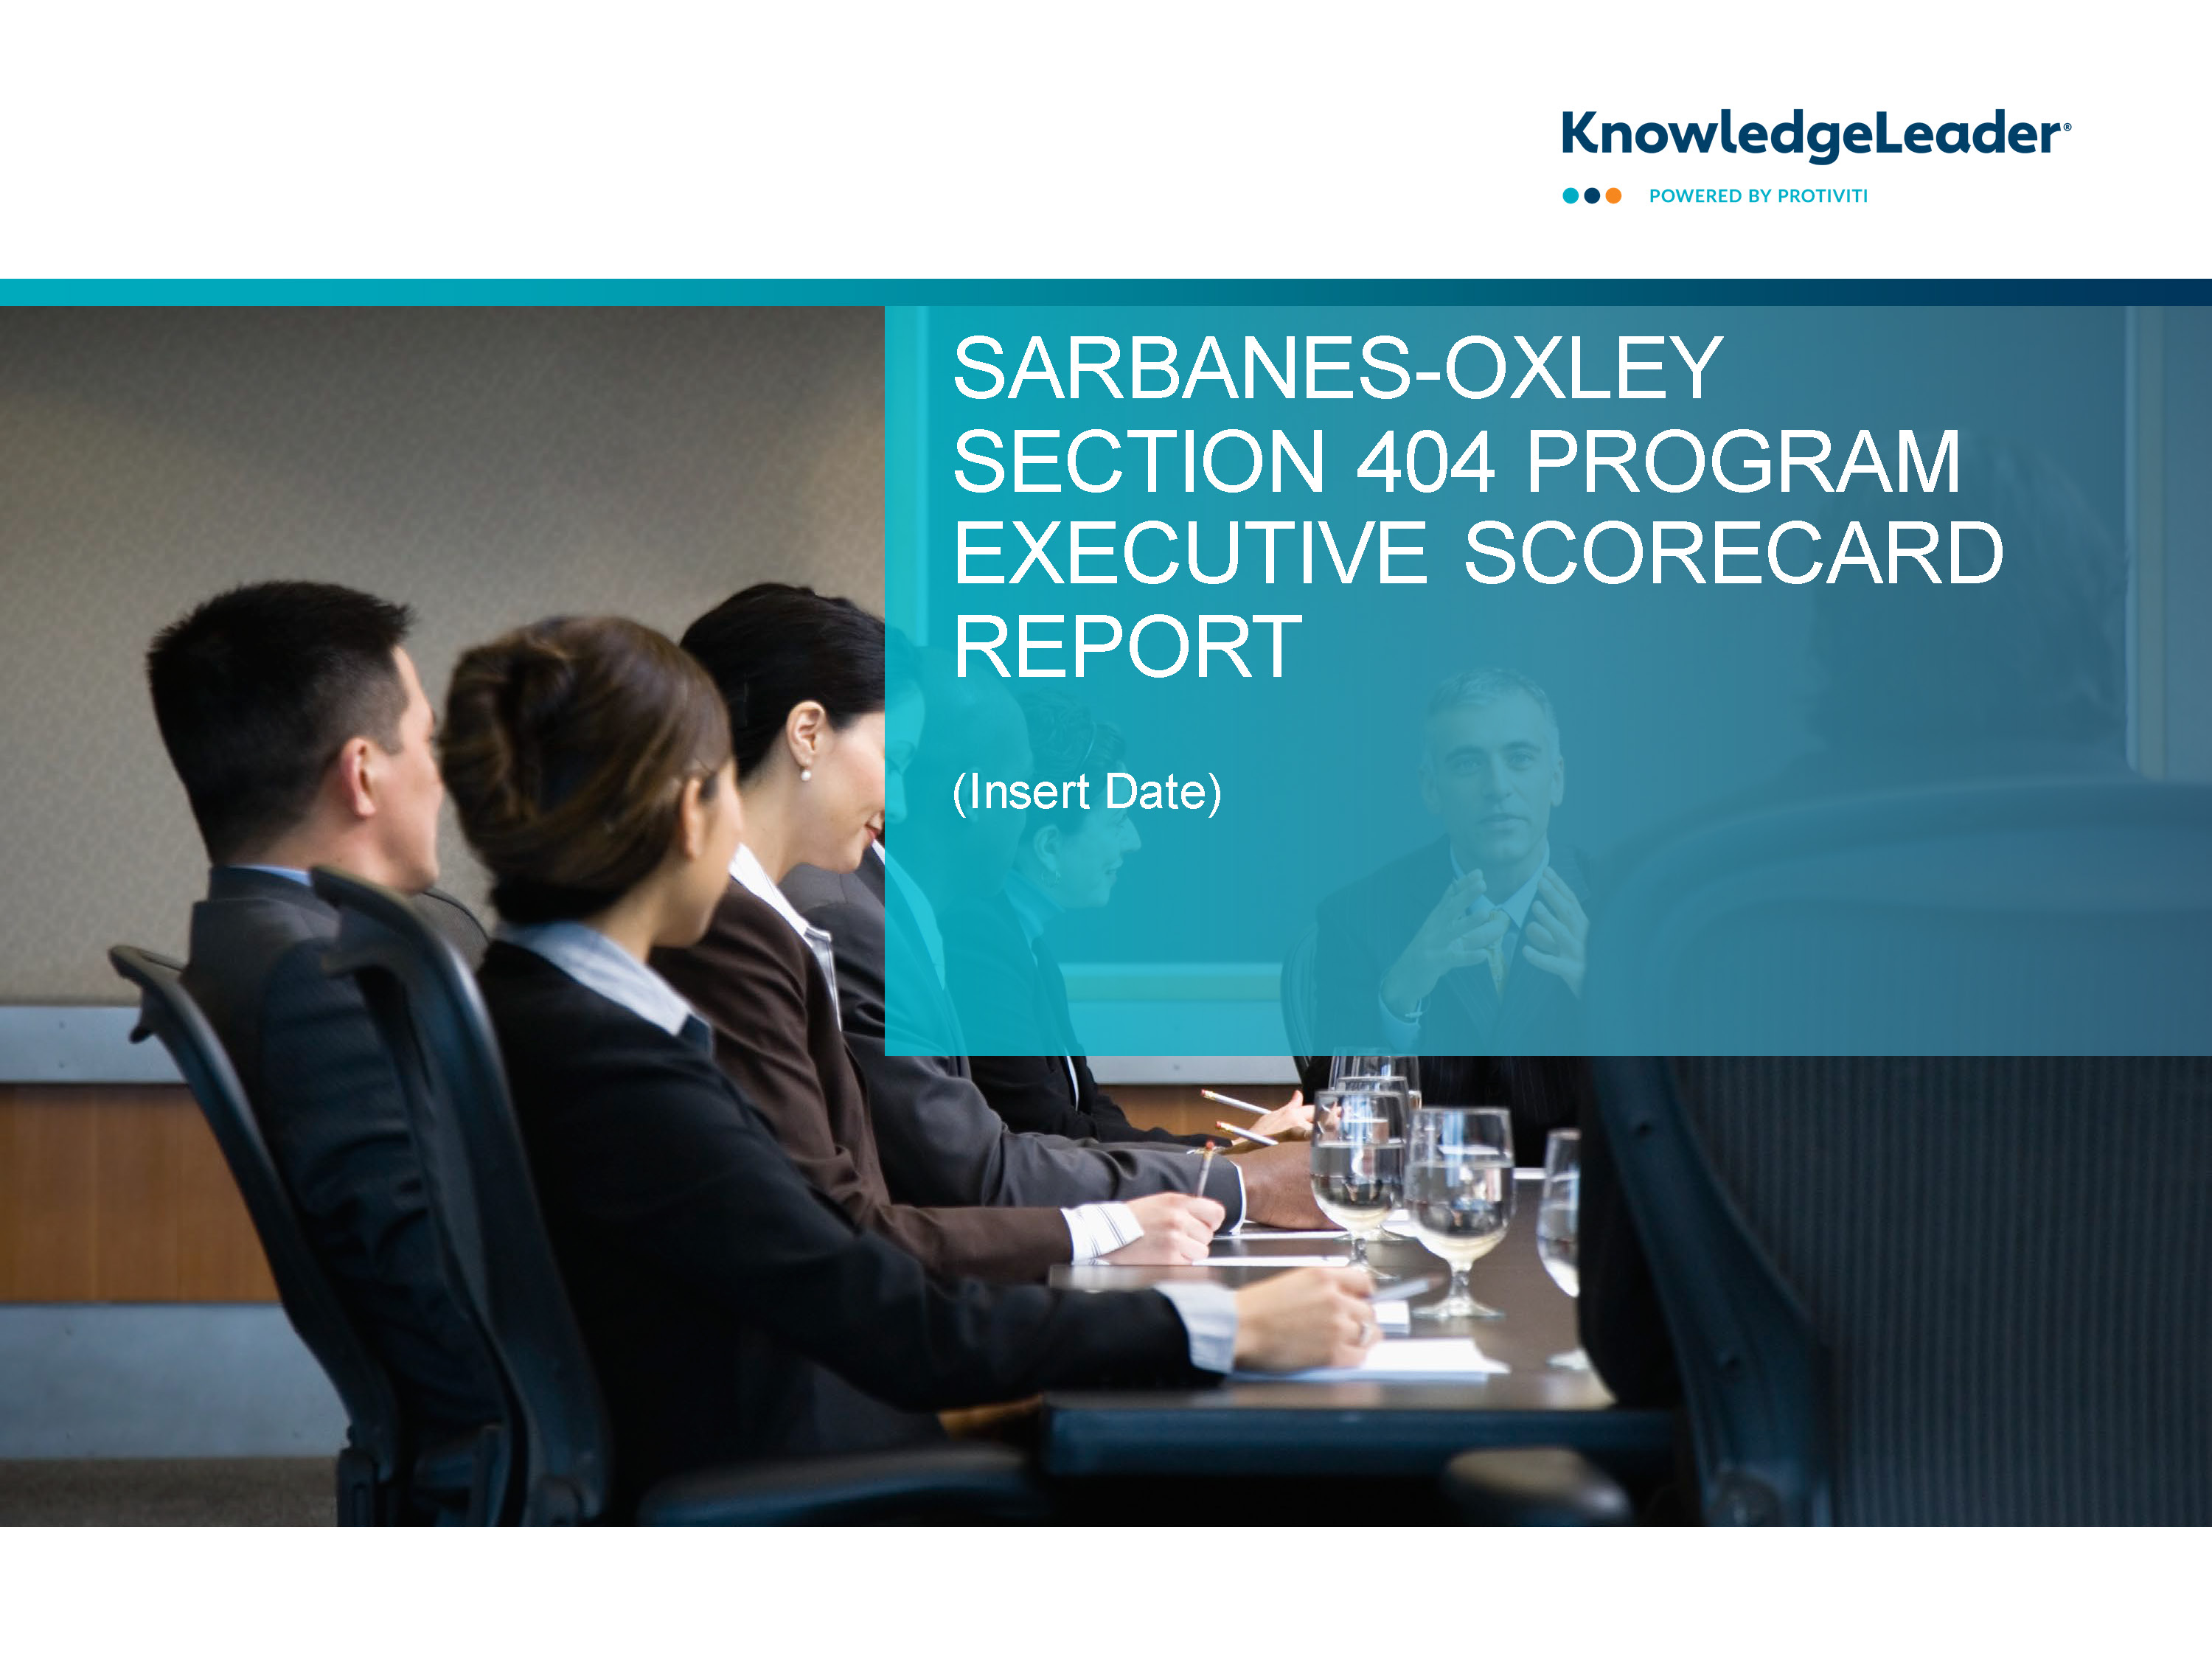 Screenshot of the first page of Sarbanes-Oxley Section 404 Program Executive Scorecard Report